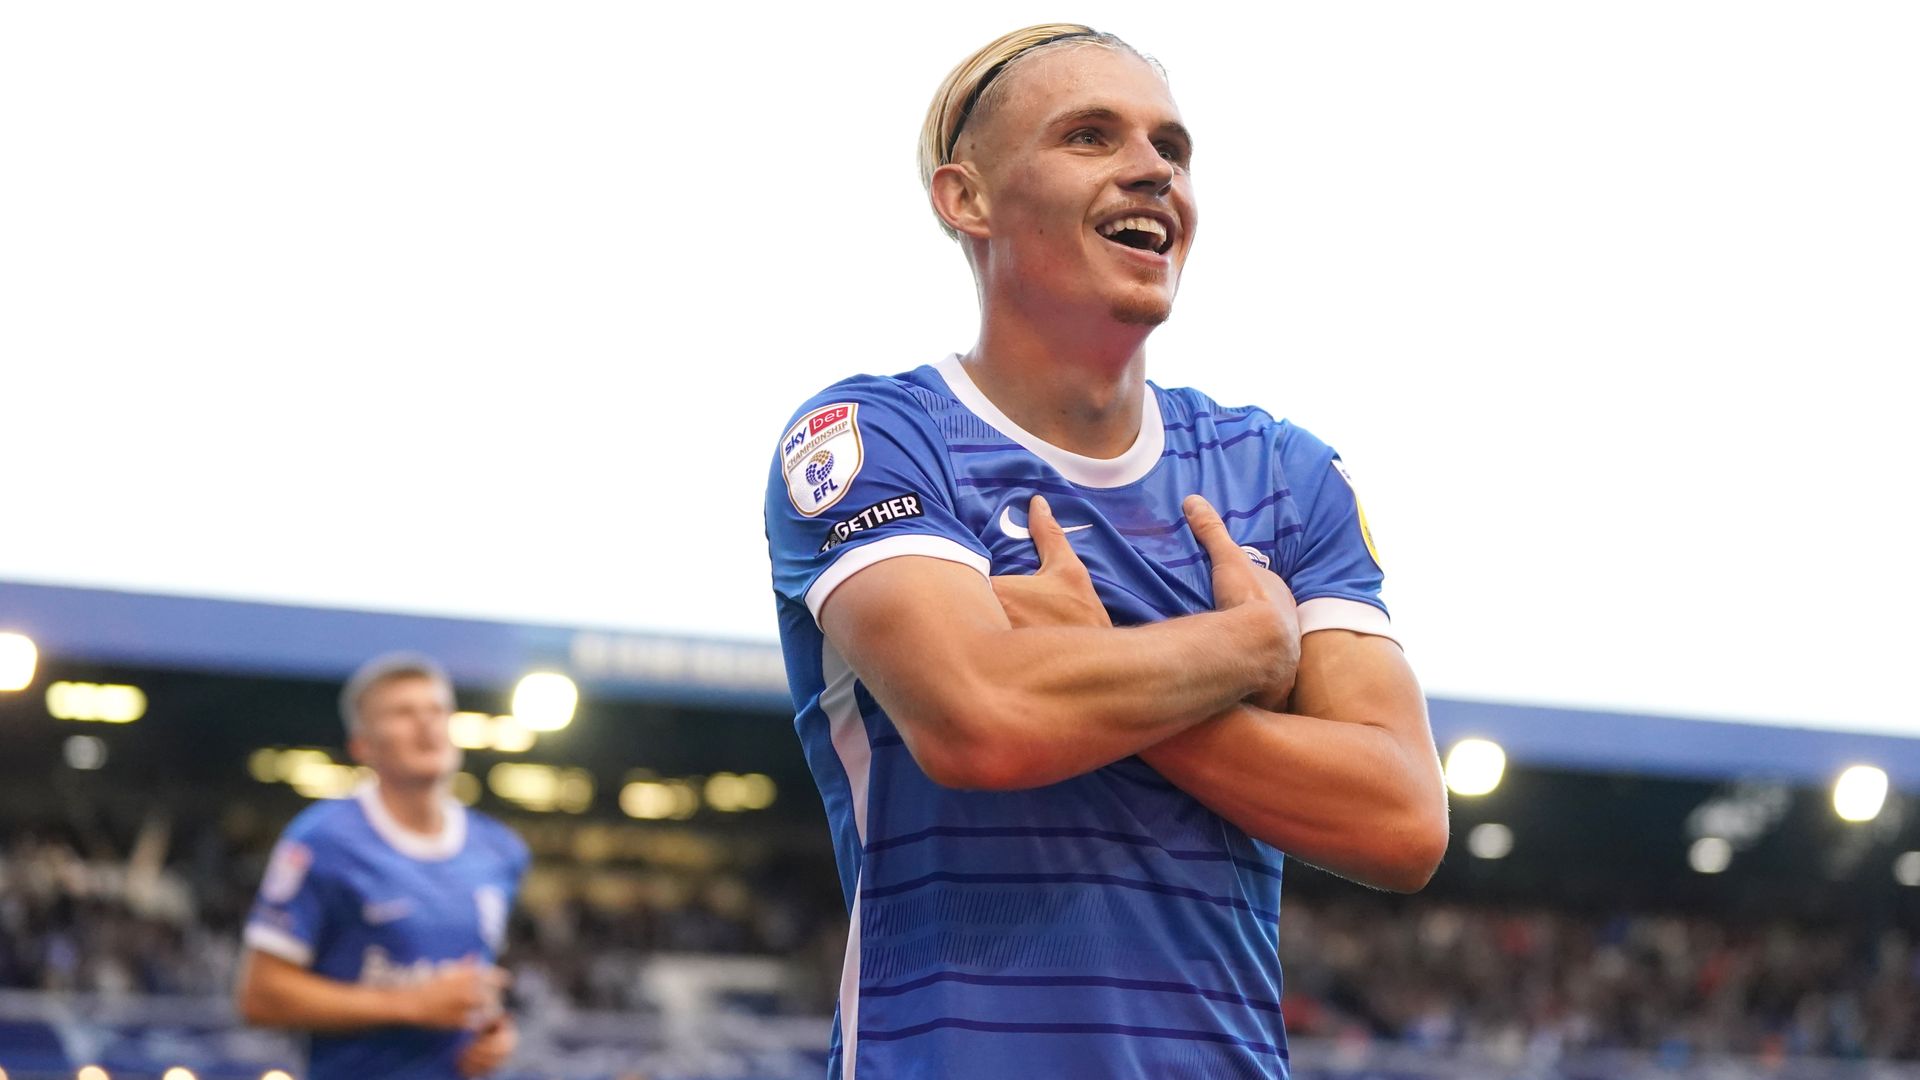 Birmingham 2-1 Huddersfield: Hosts put off-field uncertainty to one side with narrow win over visitors